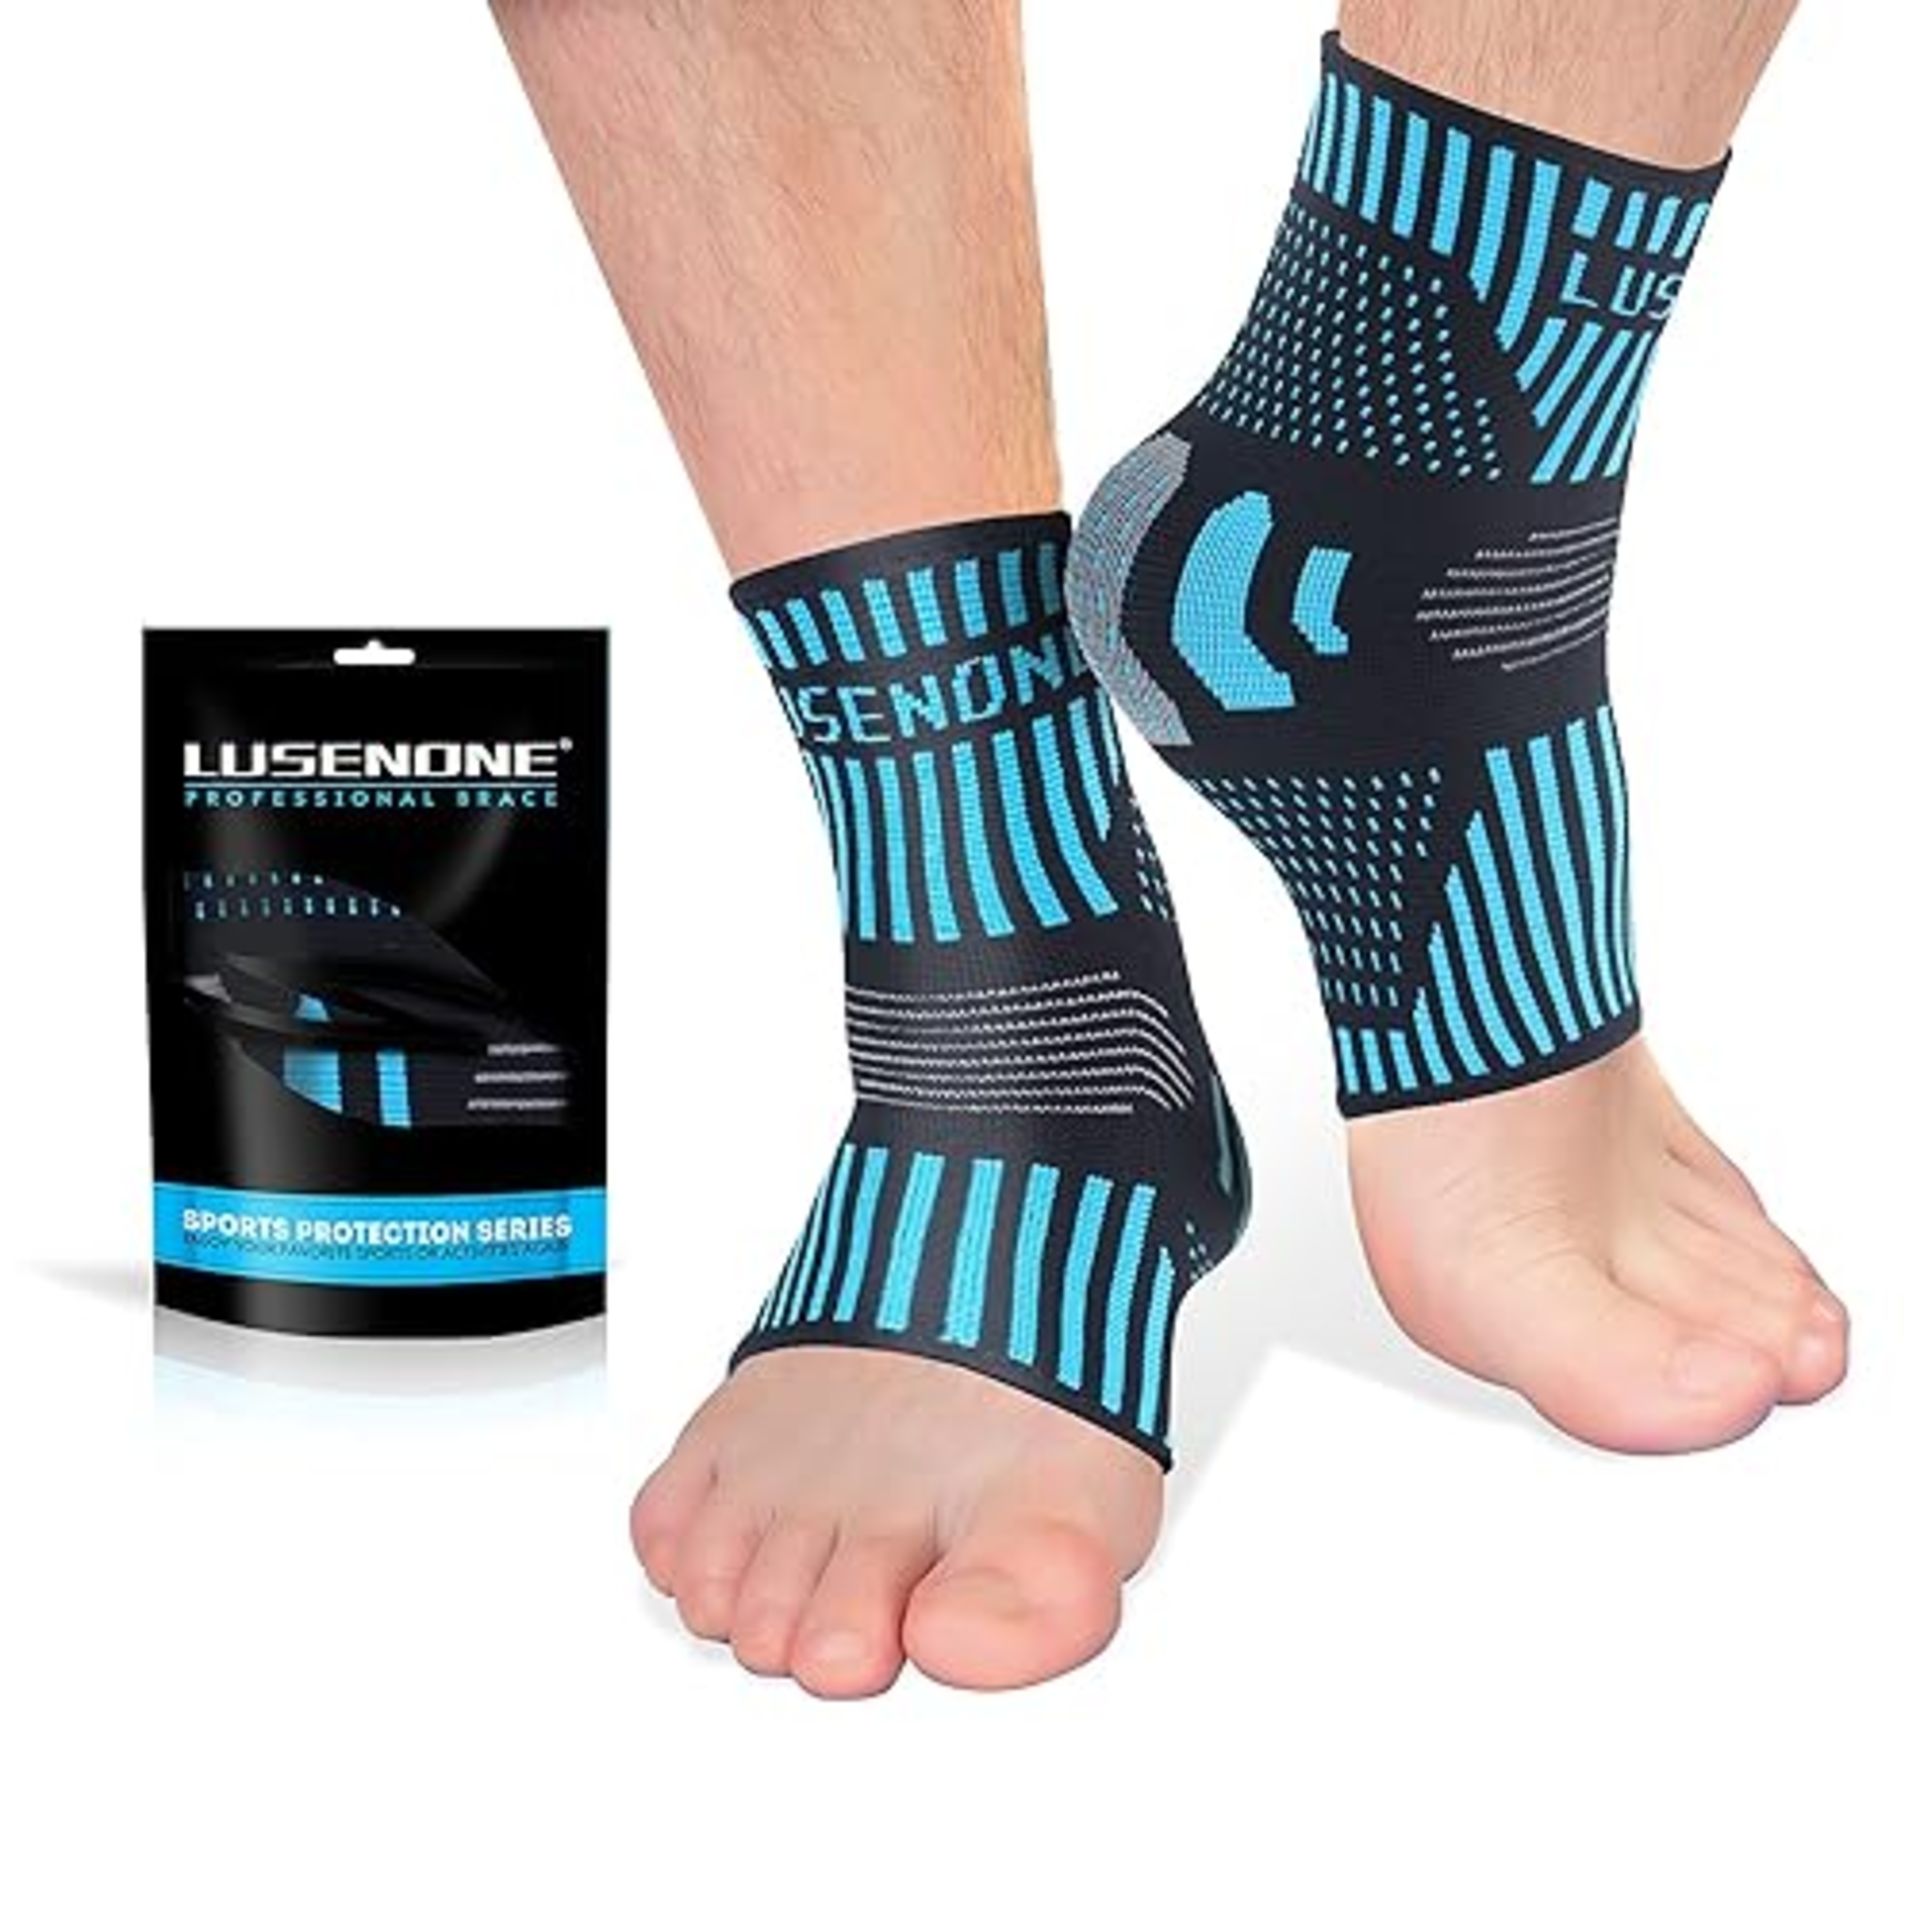 Professional Ankle Support Brace 2 Pack, Breathable Plantar Fasciitis Socks, Anti-Slip Ankle Compre